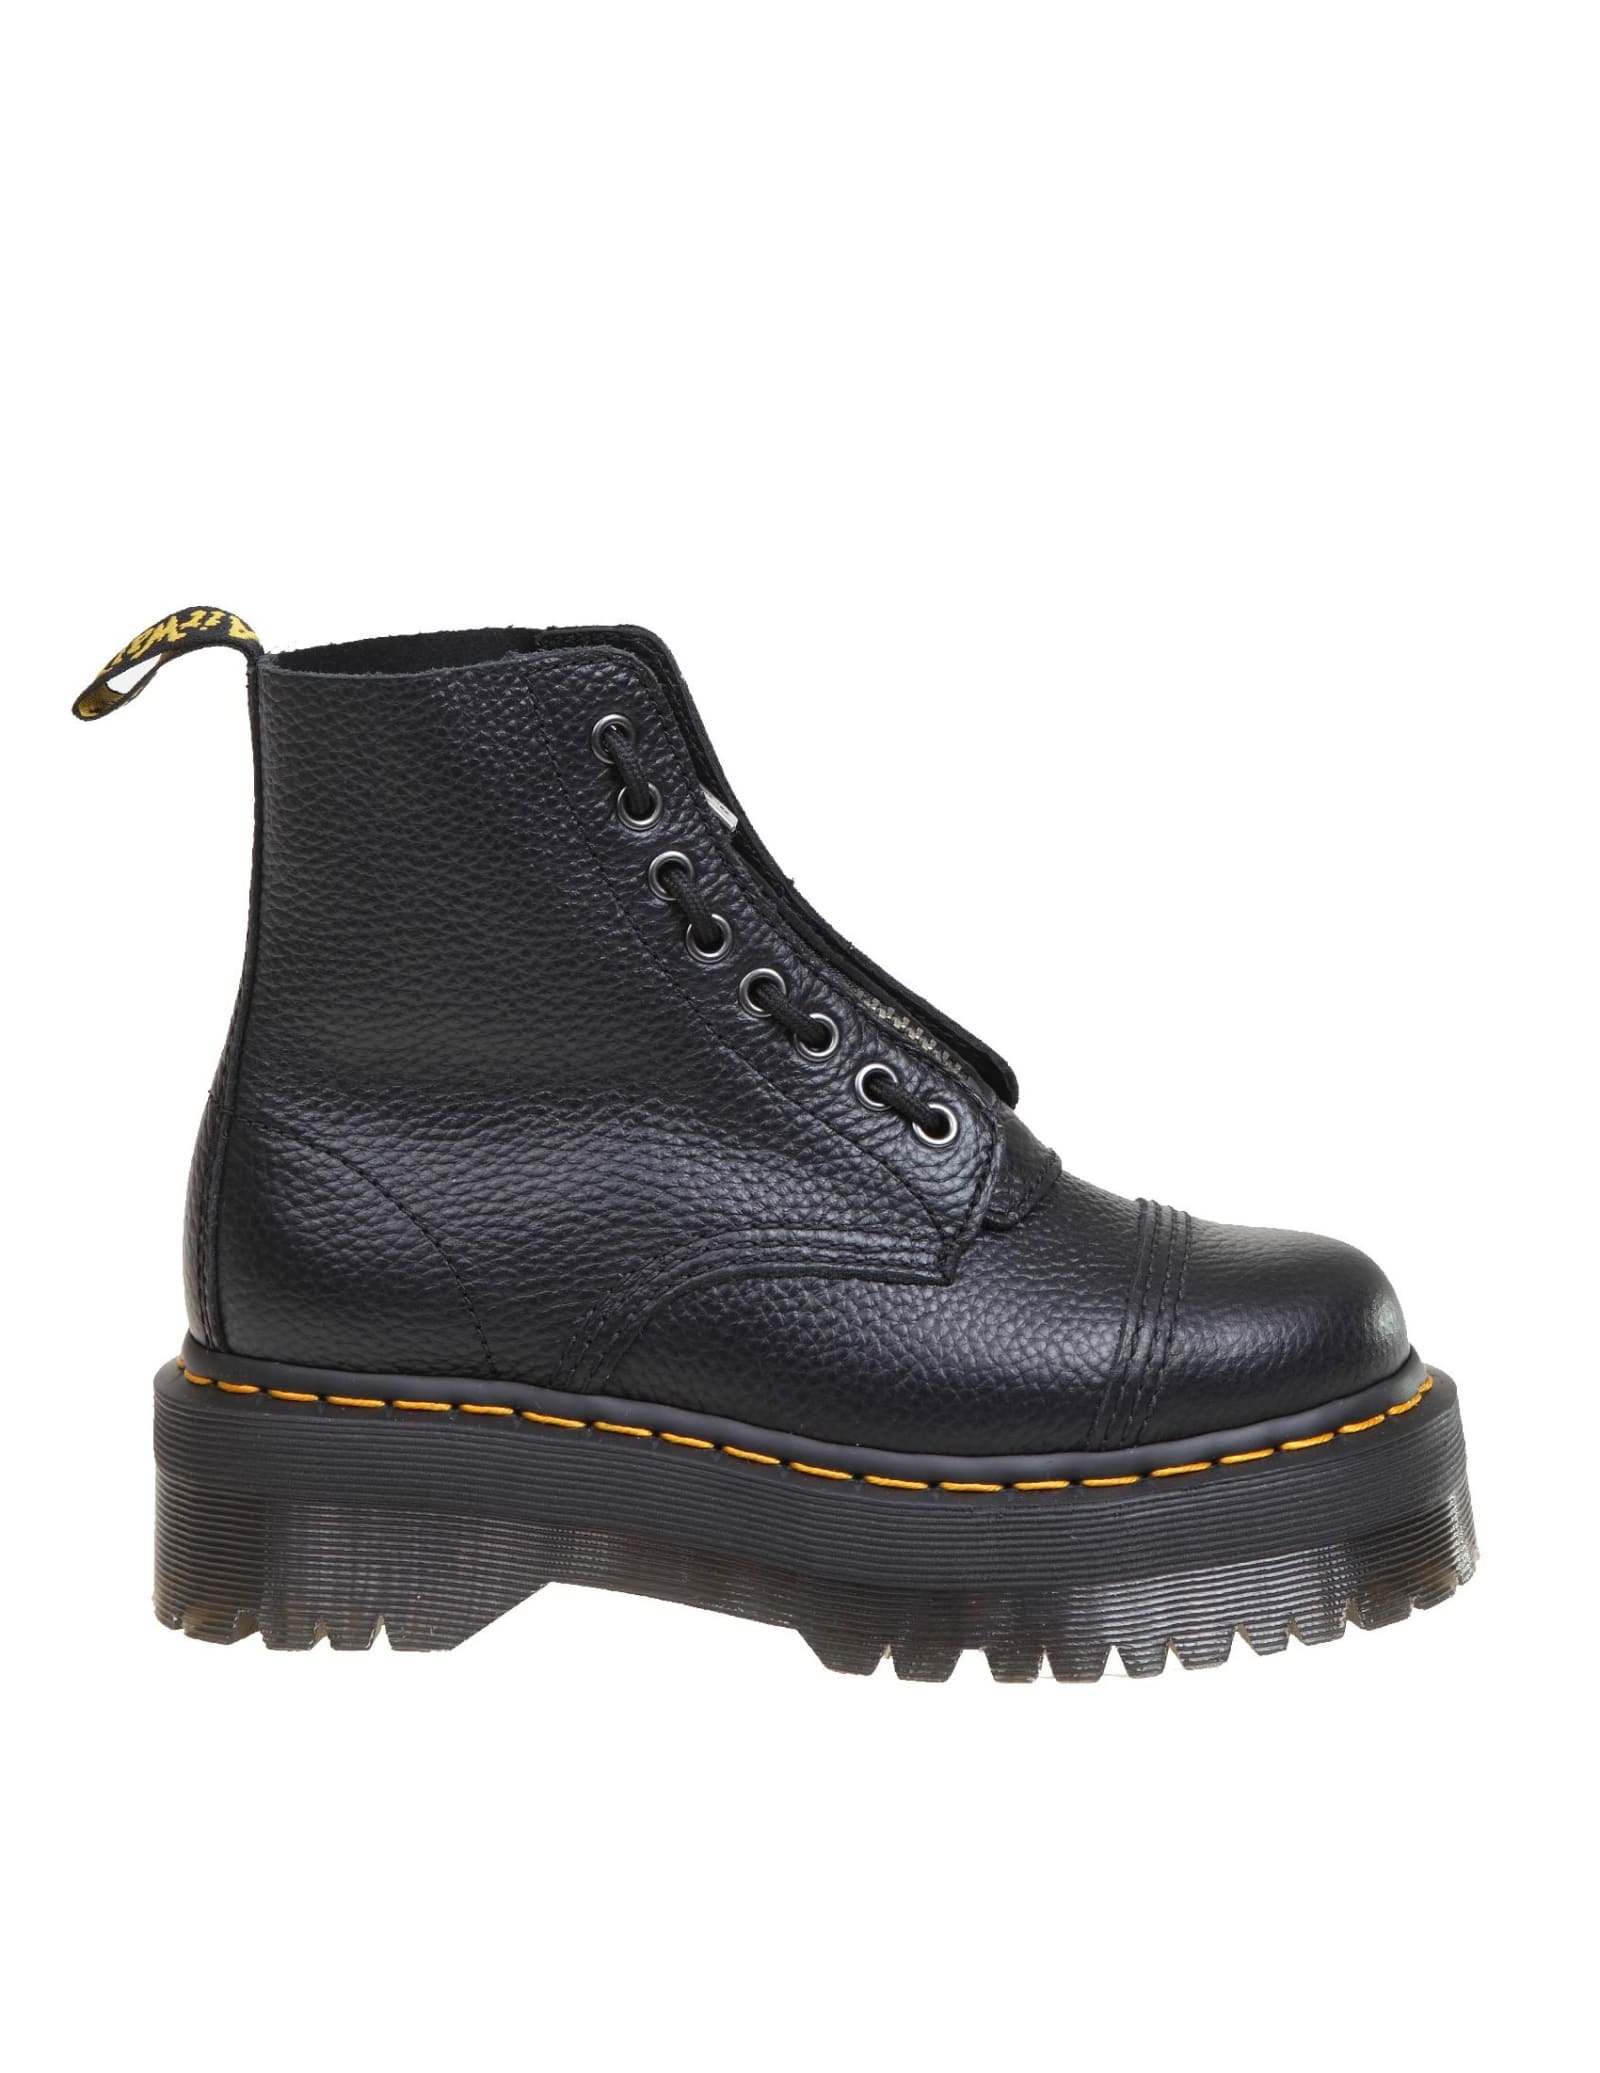 Dr. Martens Dr. martens Sinclair Boots In Black Leather